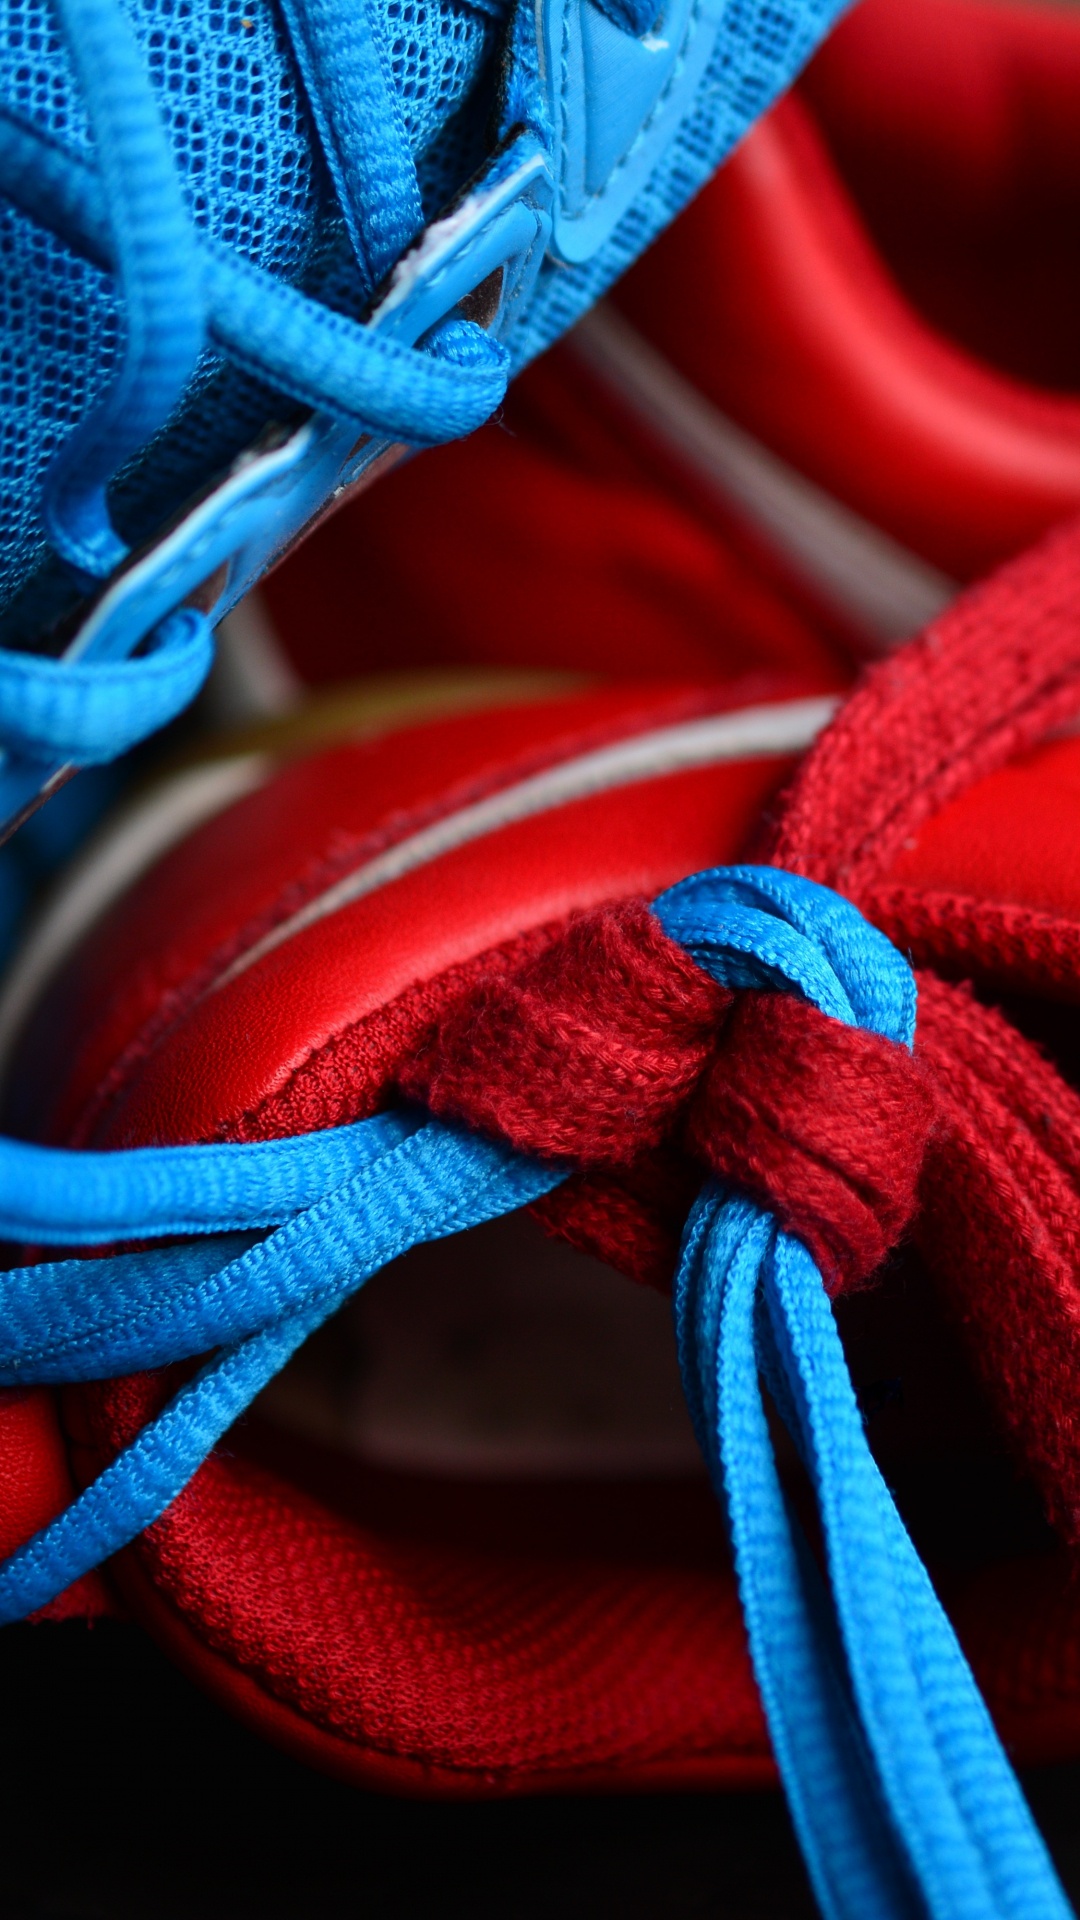 Red and Blue Lace up Shoes. Wallpaper in 1080x1920 Resolution